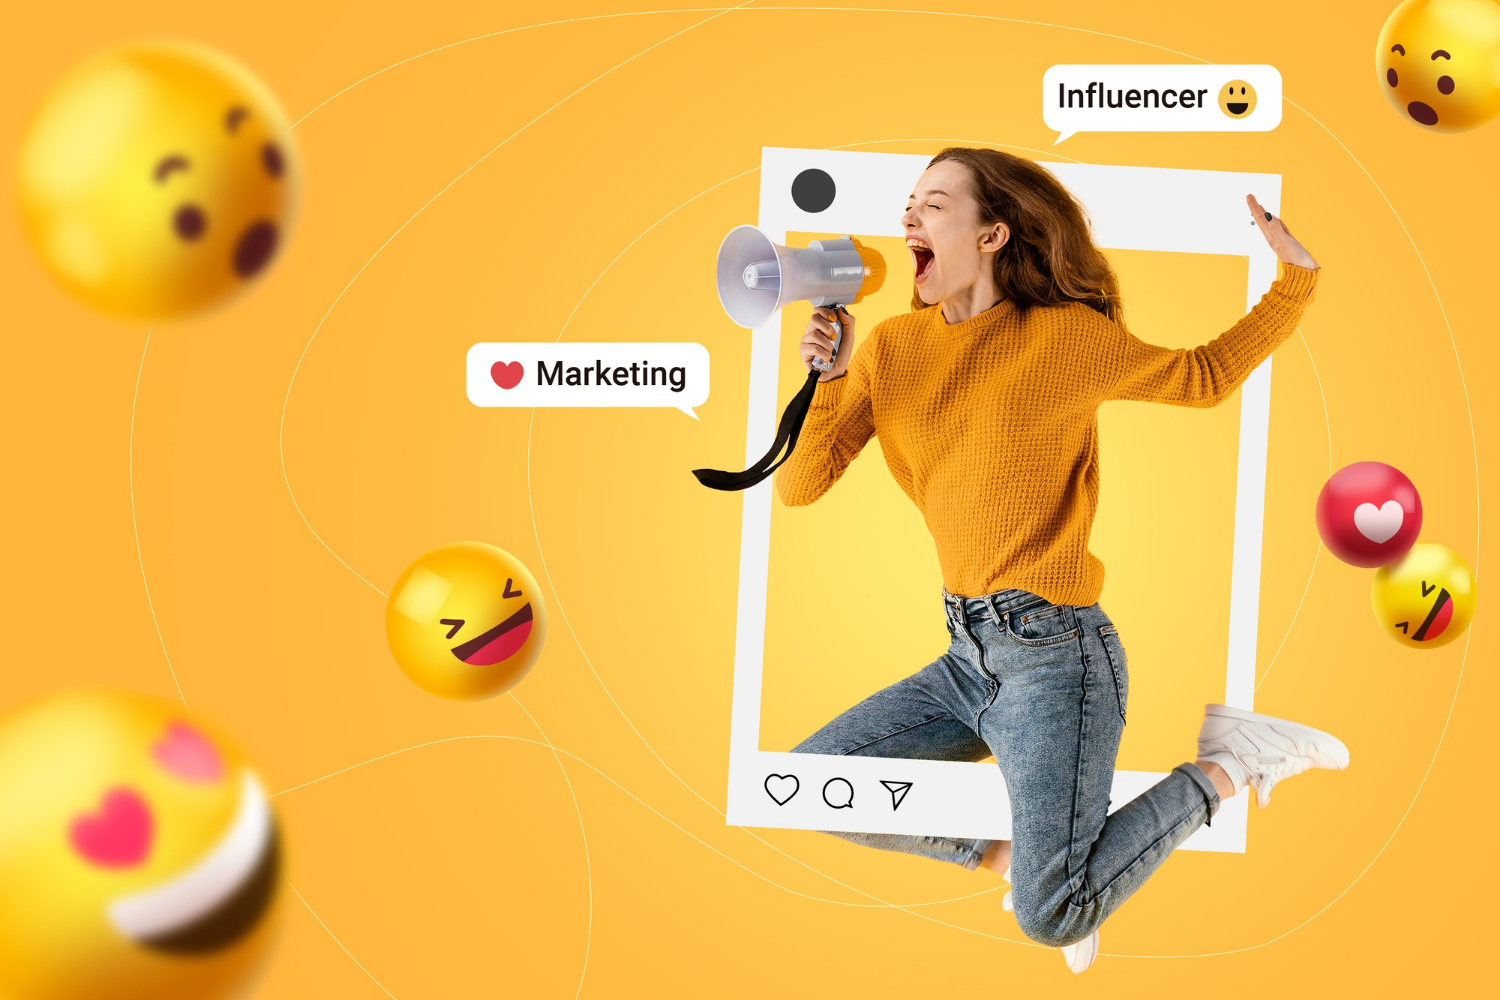 Influencer Marketing 101: How to Partner with Social Media Influencers